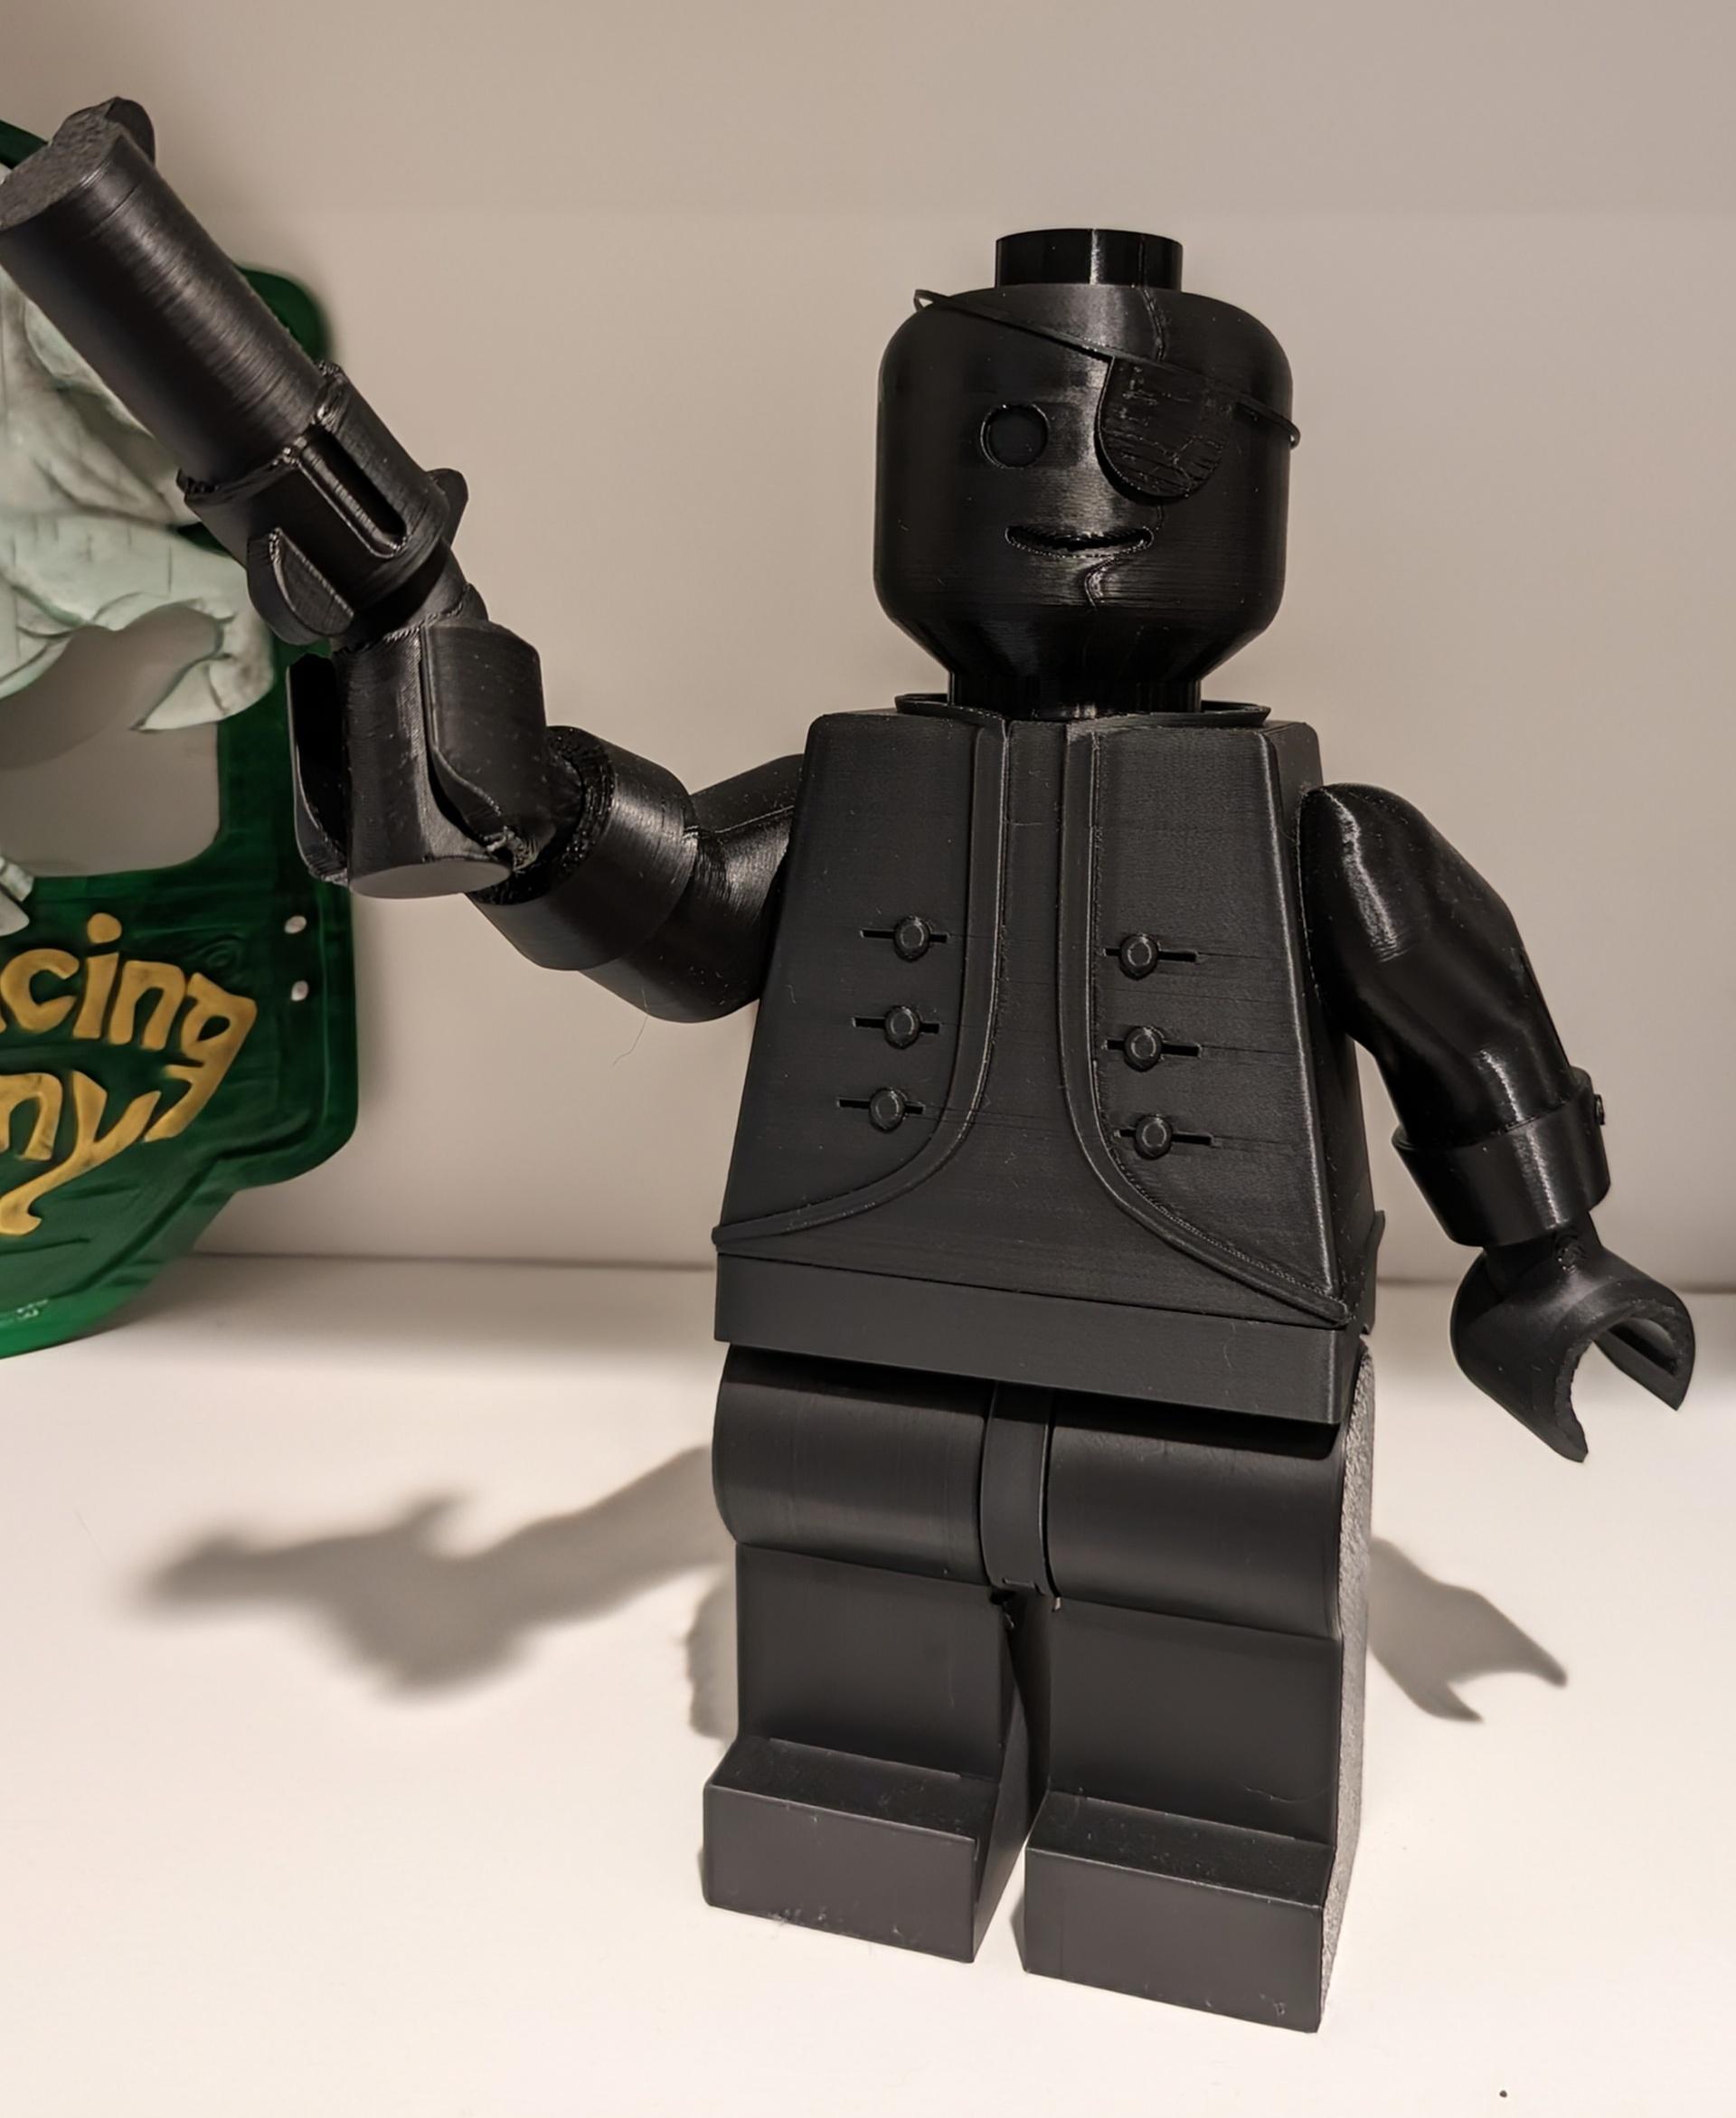 Generic Figure (6:1 LEGO-inspired brick figure, NO MMU/AMS, NO supports, NO glue) - face ended up with a bit of weird line down one side, but it's ok, I put an eye patch over it and it's just an on-brand scar now - 3d model